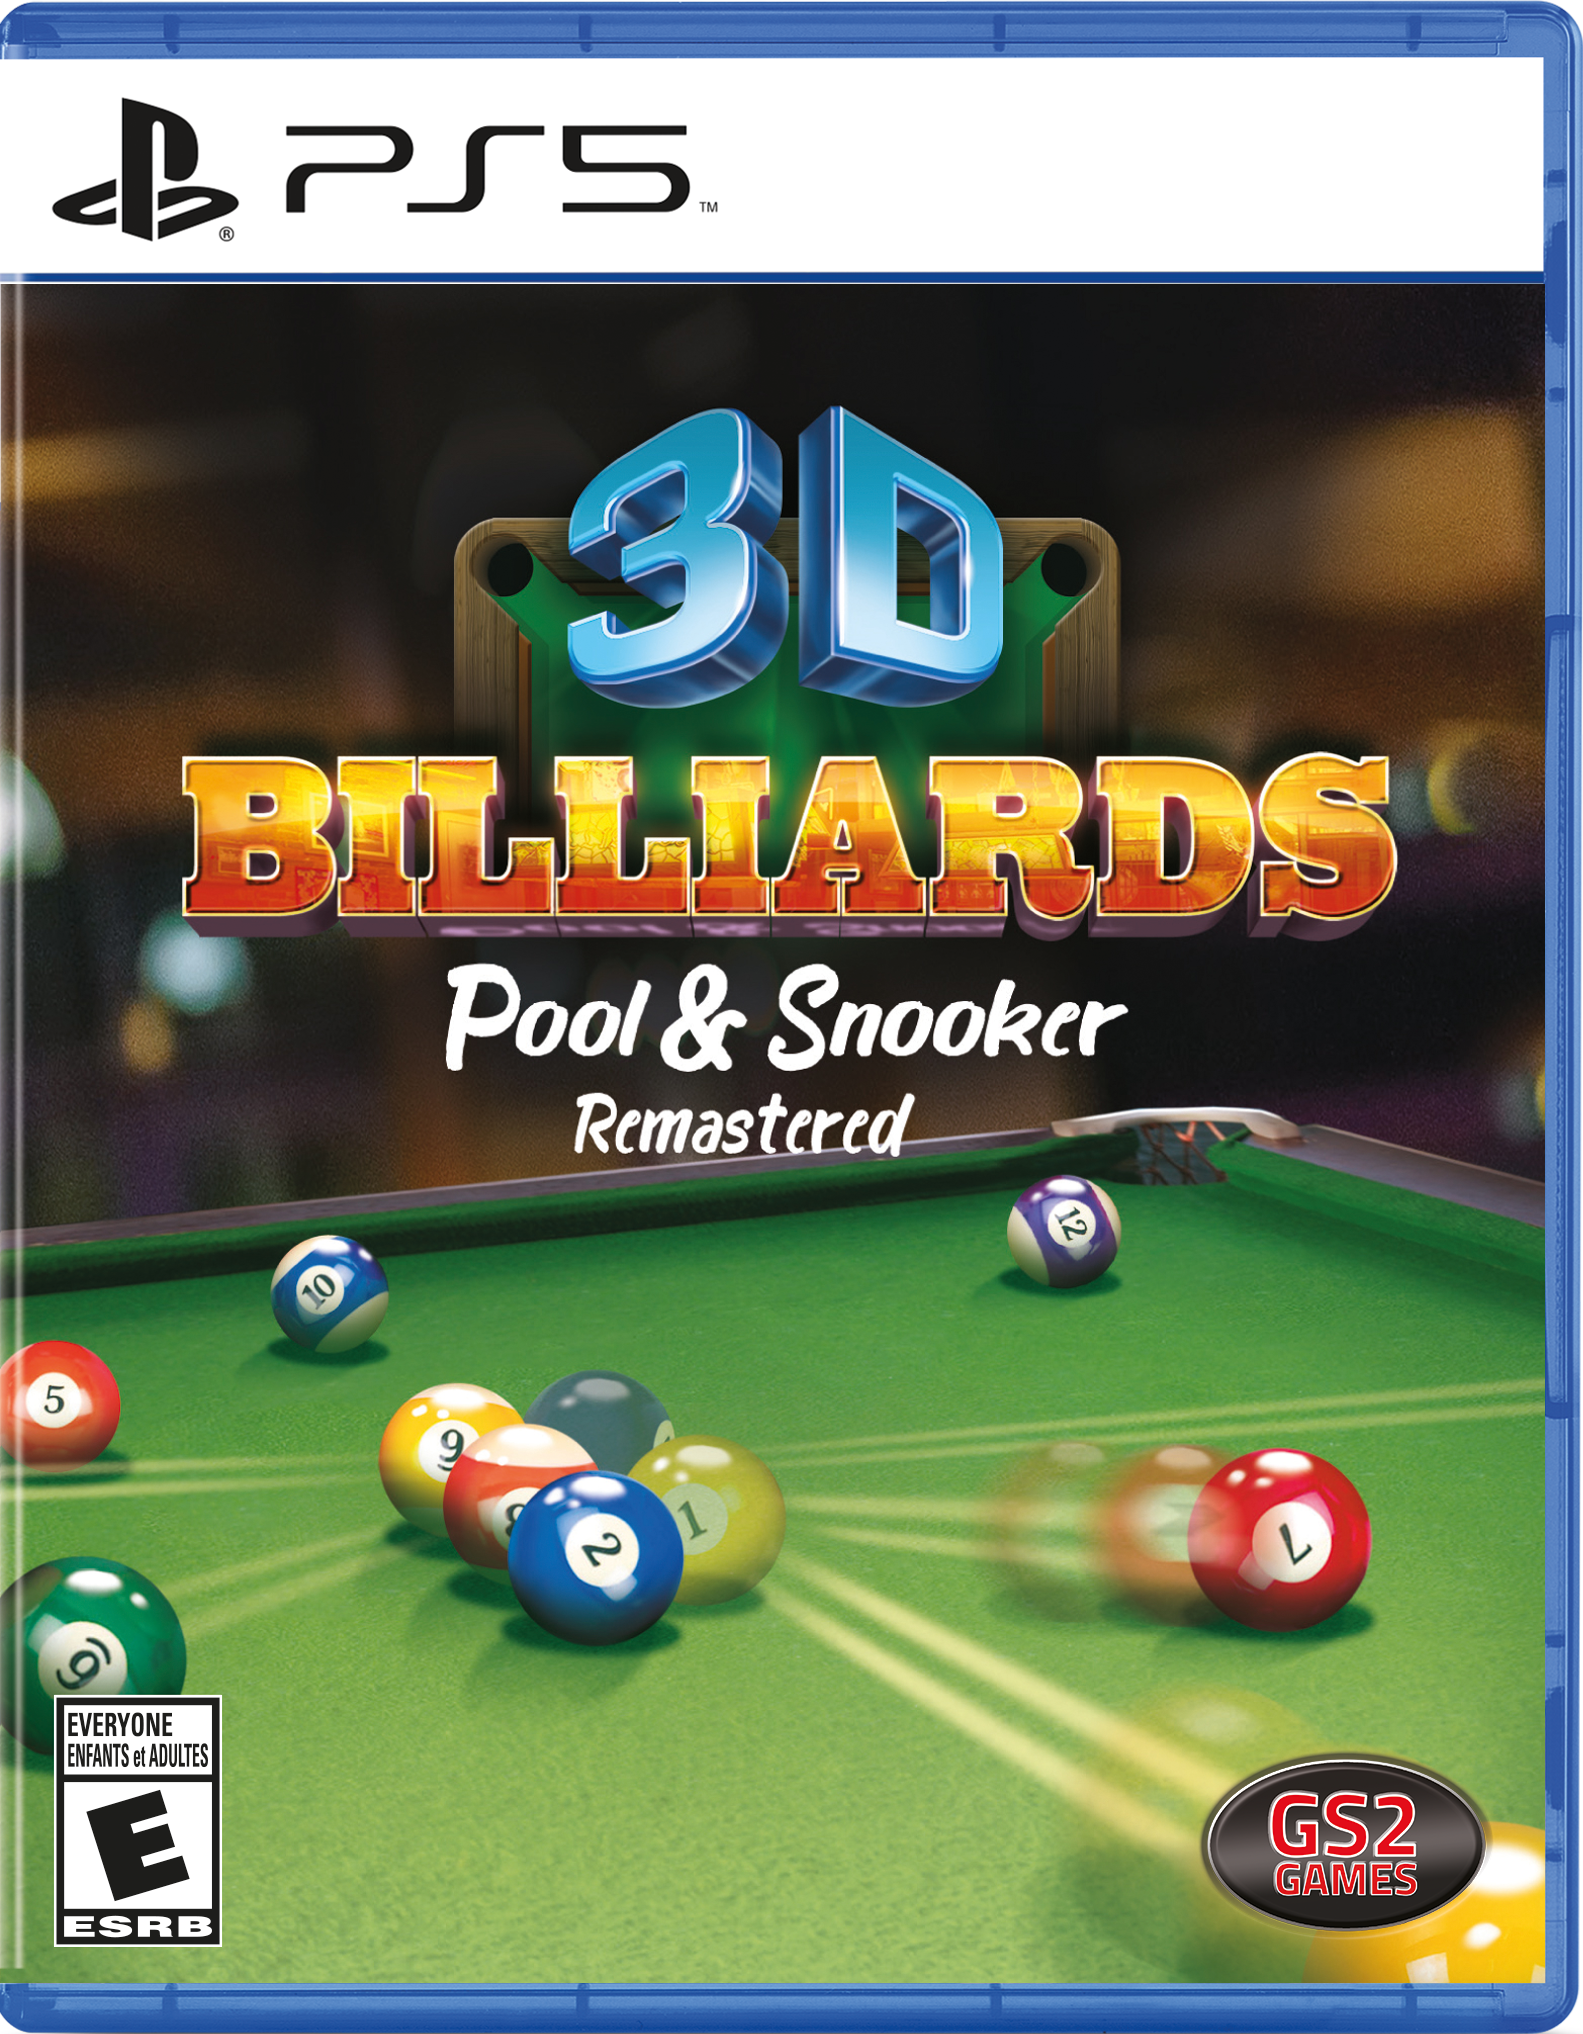 3D Billiards: Pool and Snooker Remastered GameStop Exclusive - PlayStation 5 (Mindscape) for PS5, New